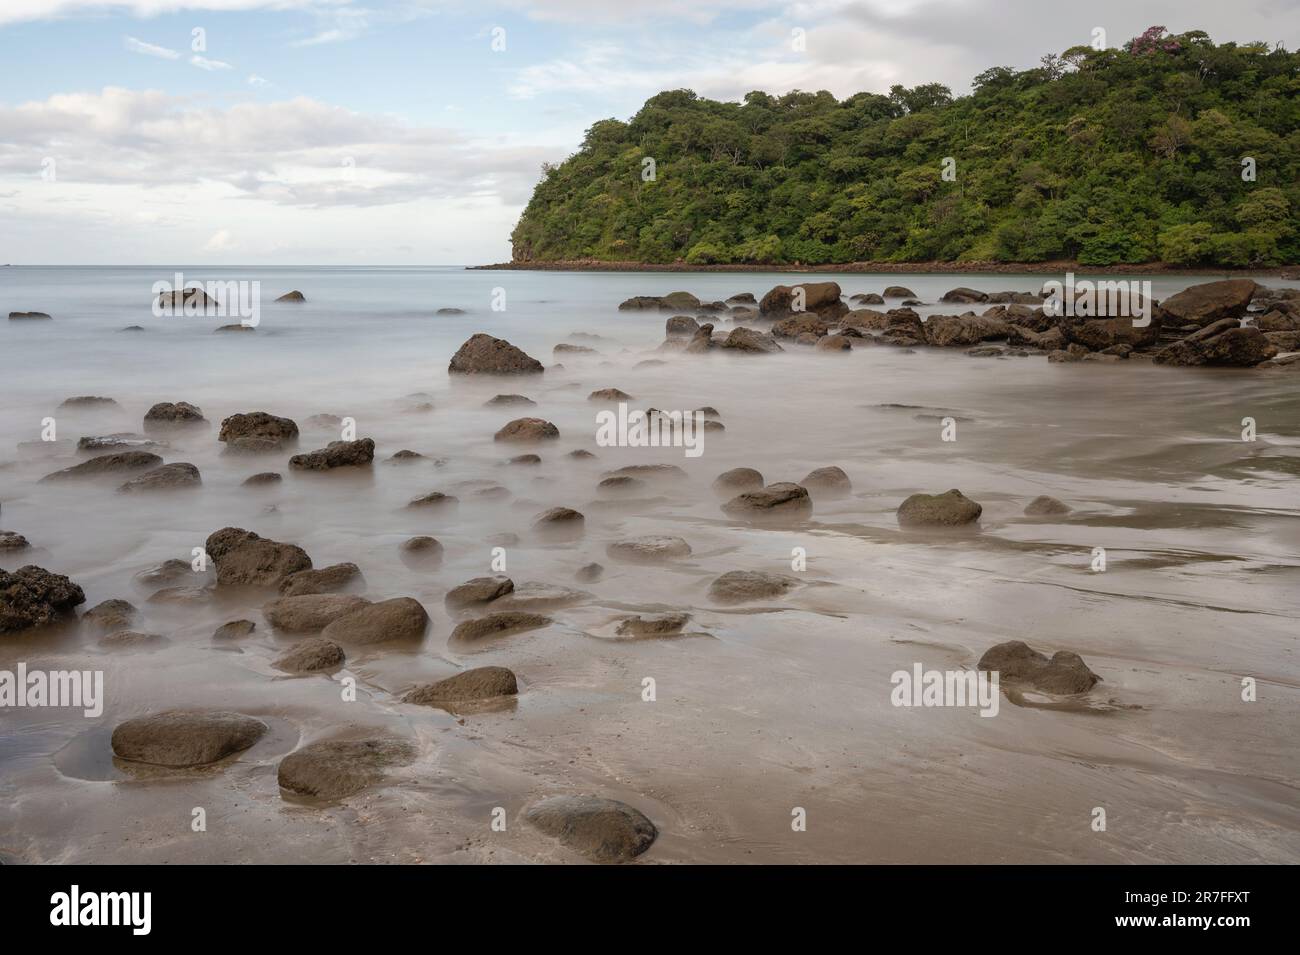 Rocks in silky sea water. Many brown stones on sea shore Stock Photo